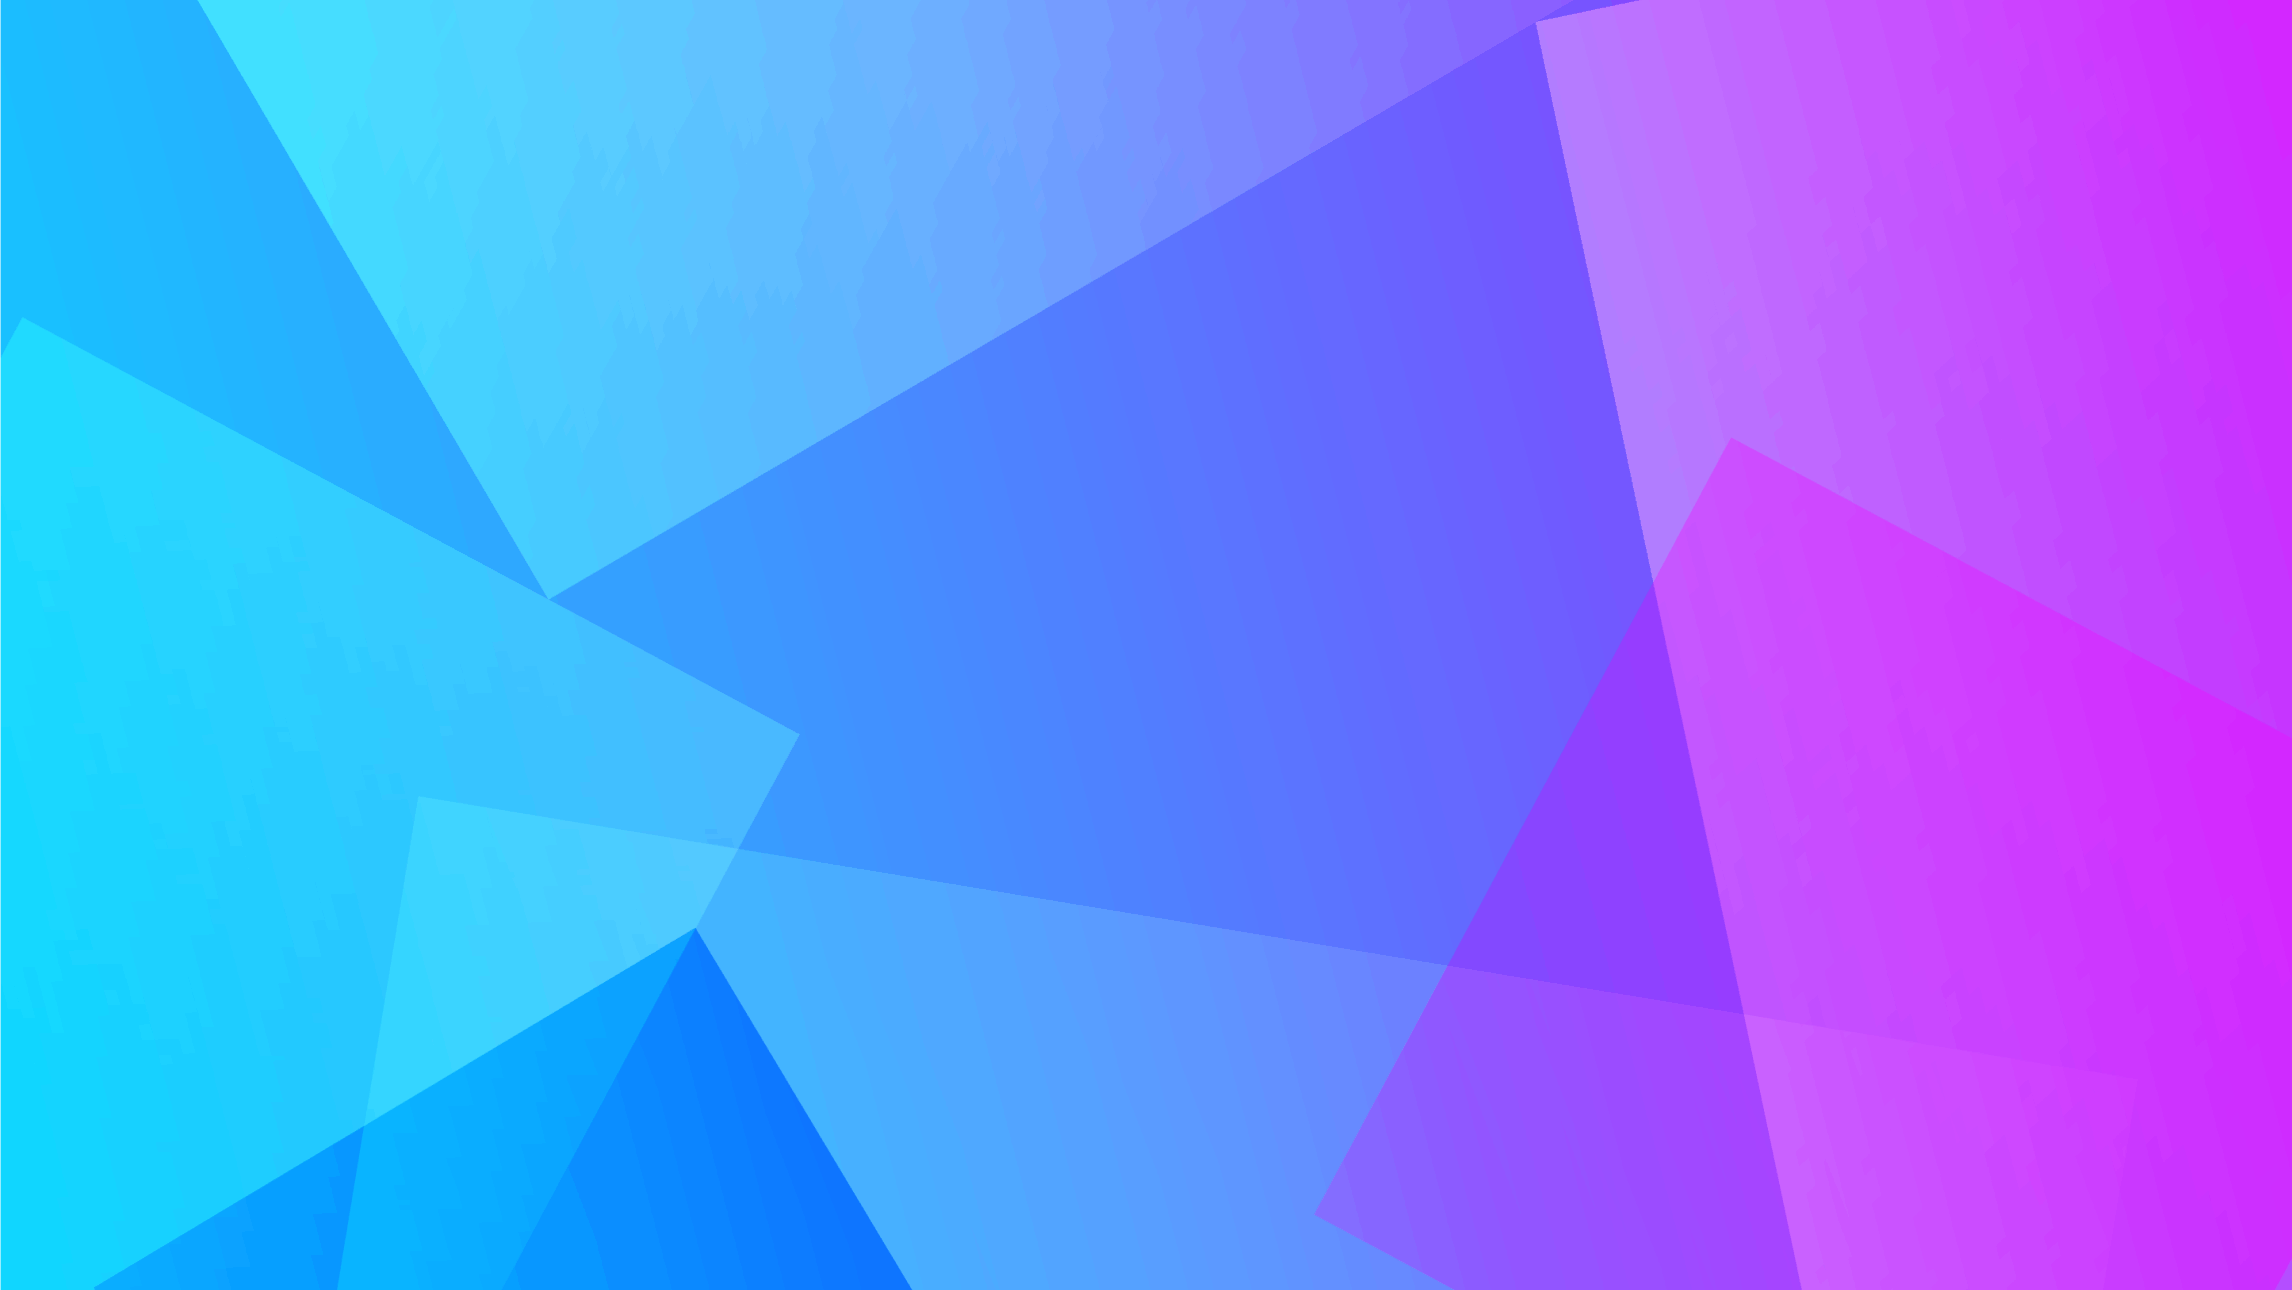 A digital rendering of large see through squares, varying in size and layered on top of each other. The layered shapes create a gradient effect from light blue to purple.